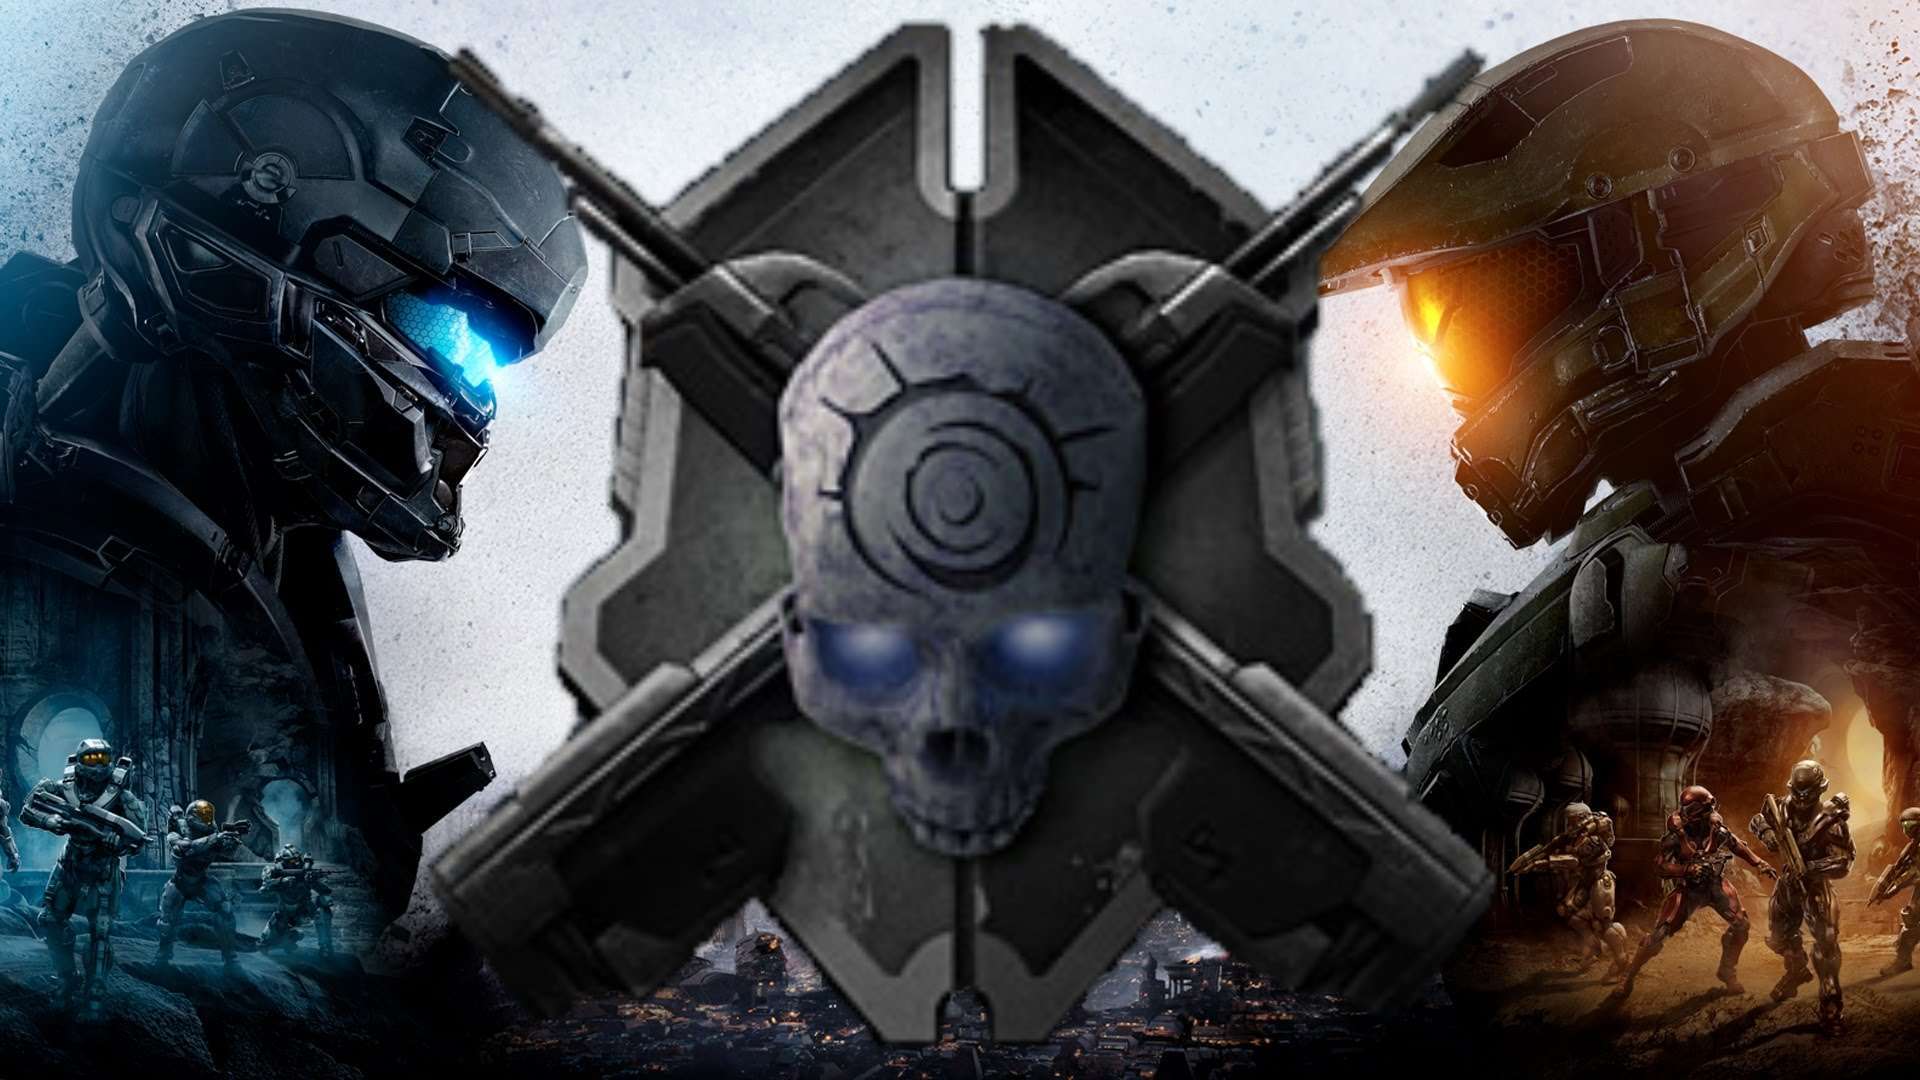 Halo Wallpapers For Free Halo 5 Wallpapers Collection - Halo 3 , HD Wallpaper & Backgrounds